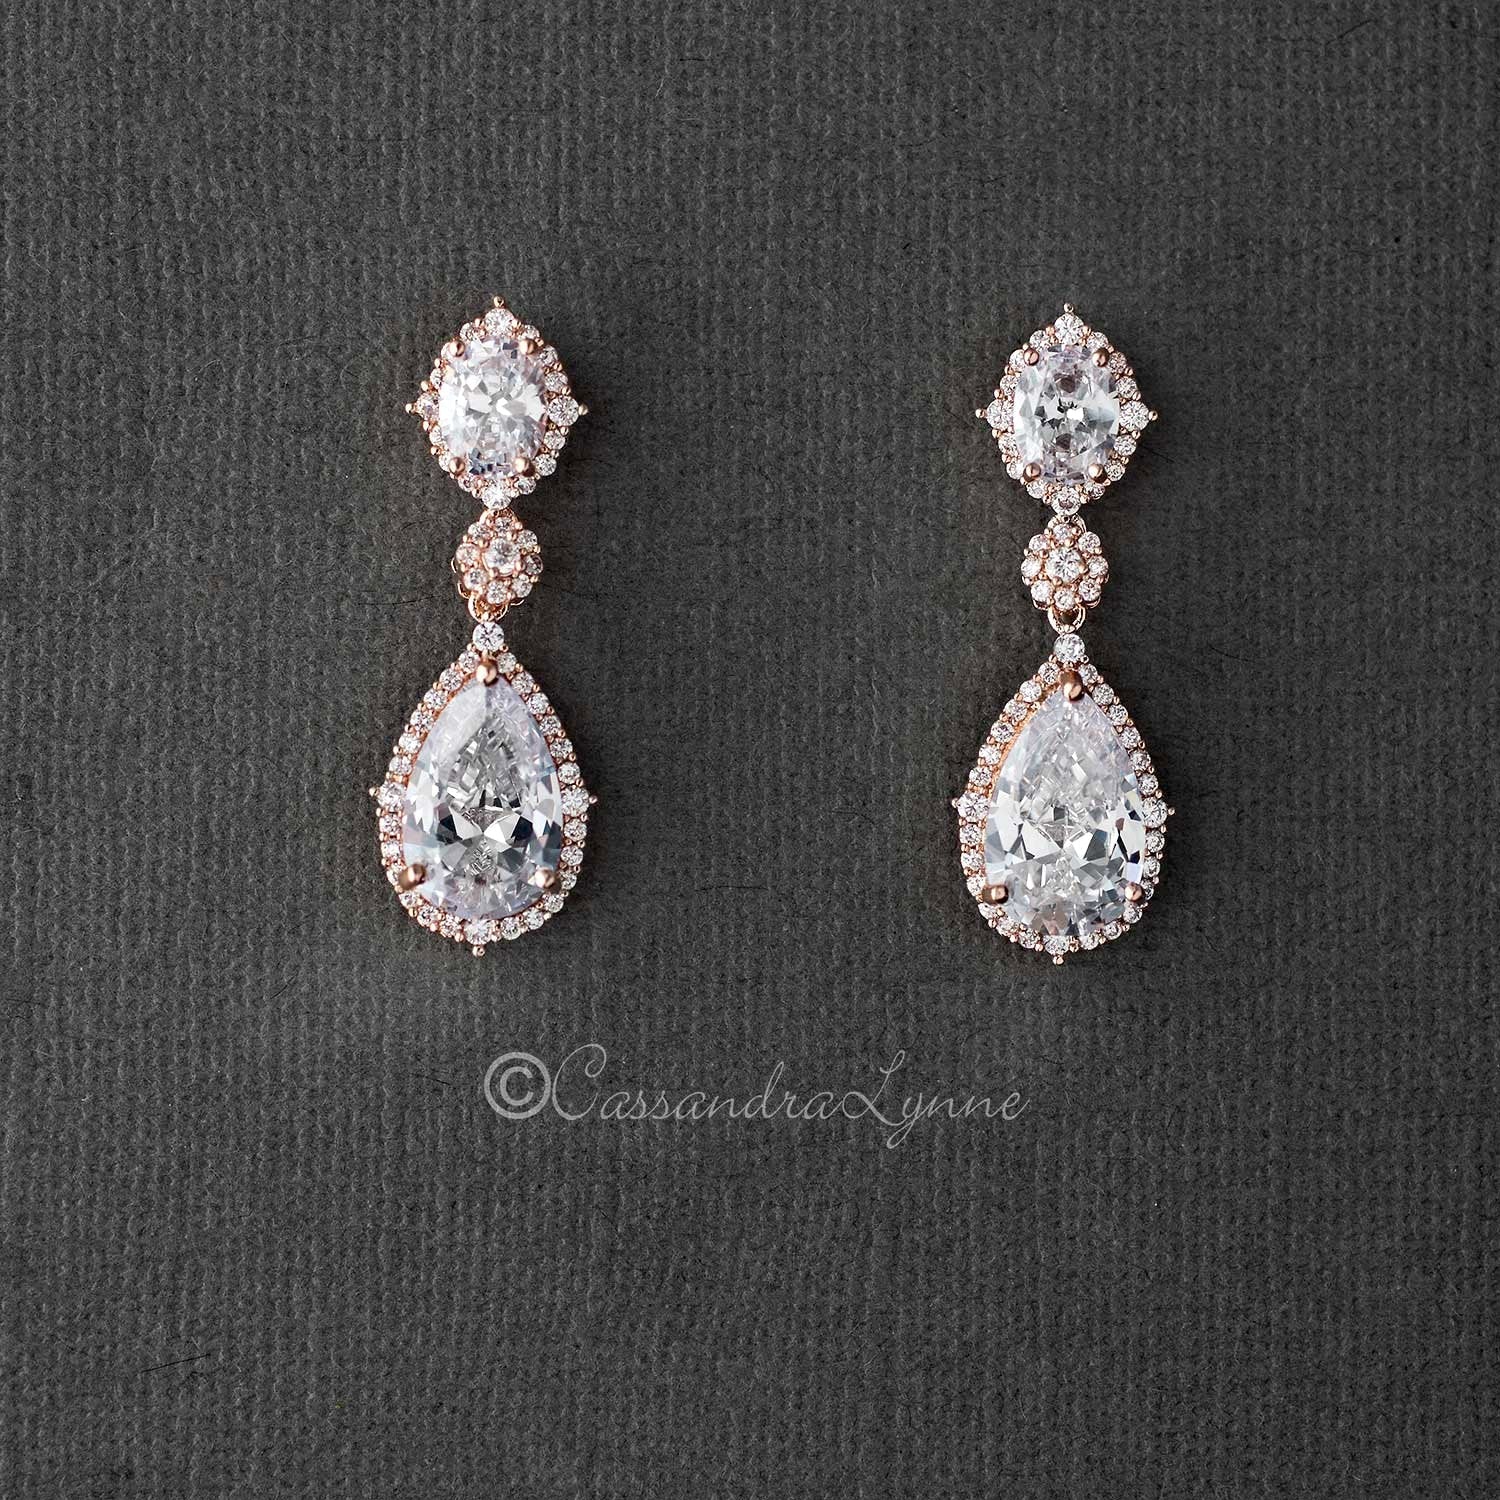 Triple Paisley Yellow, White and Rose Gold Drop Earrings with Diamonds